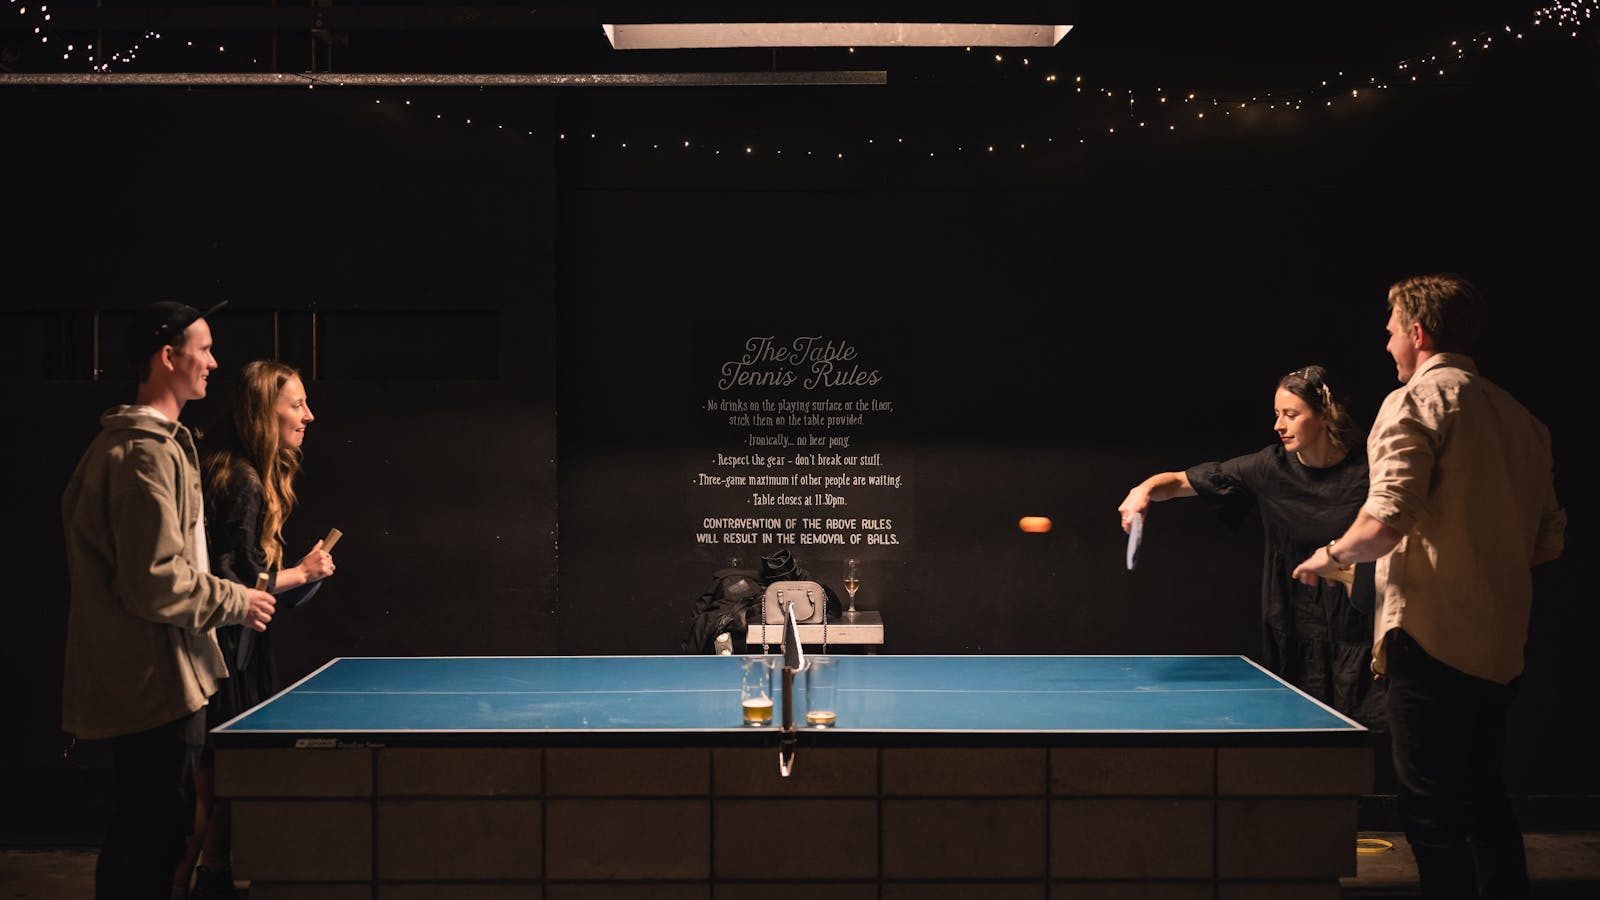 Challenge your friends to a Table Tennis match while enjoying our beers